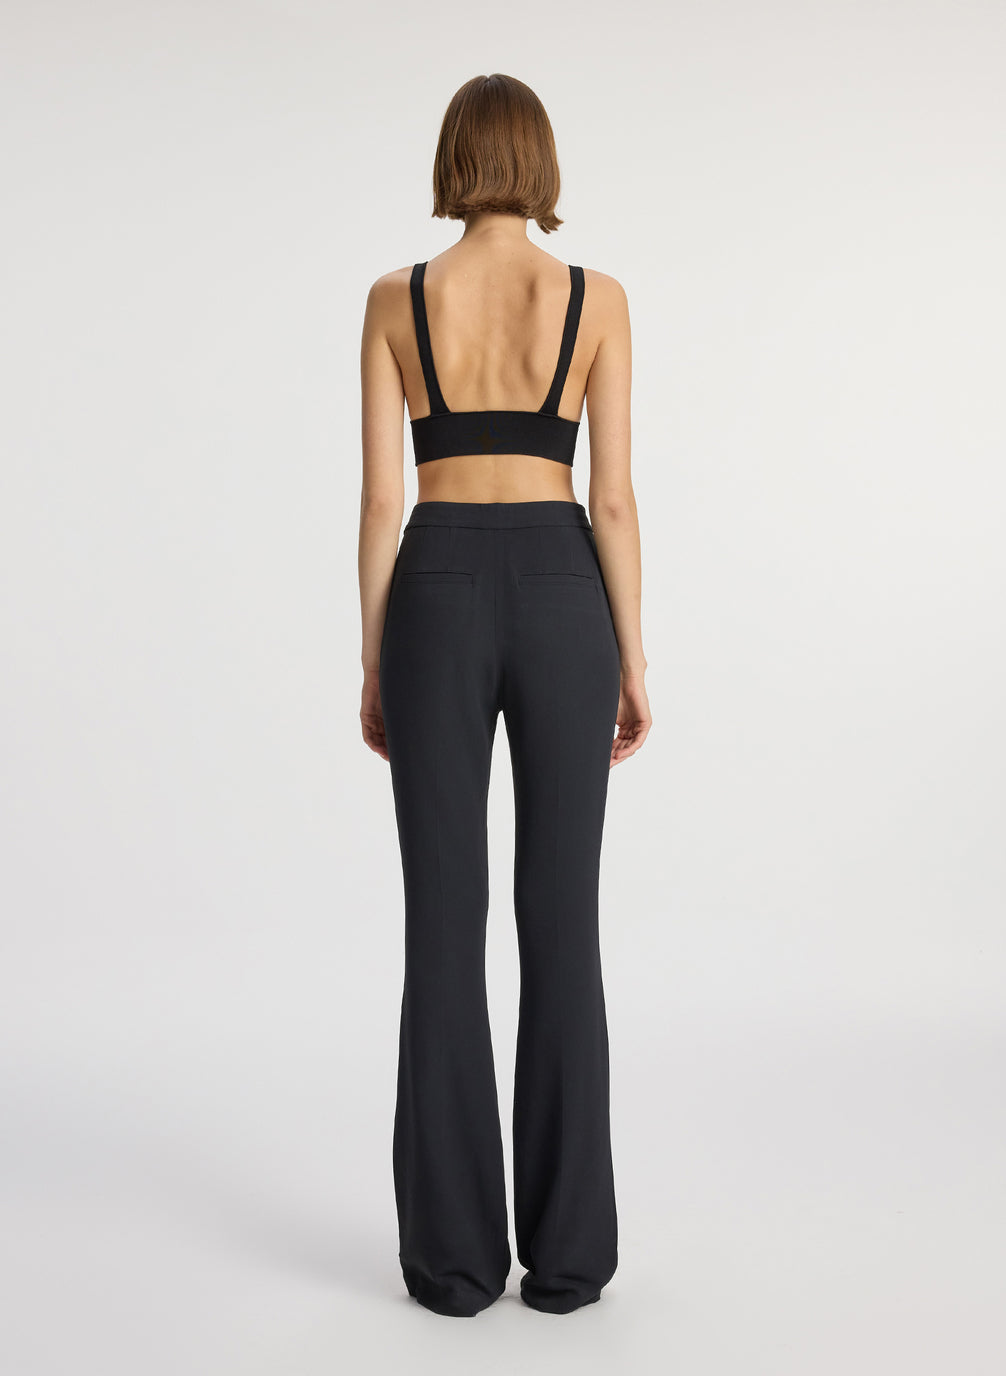 back view of woman wearing black knit bra and black flared pants